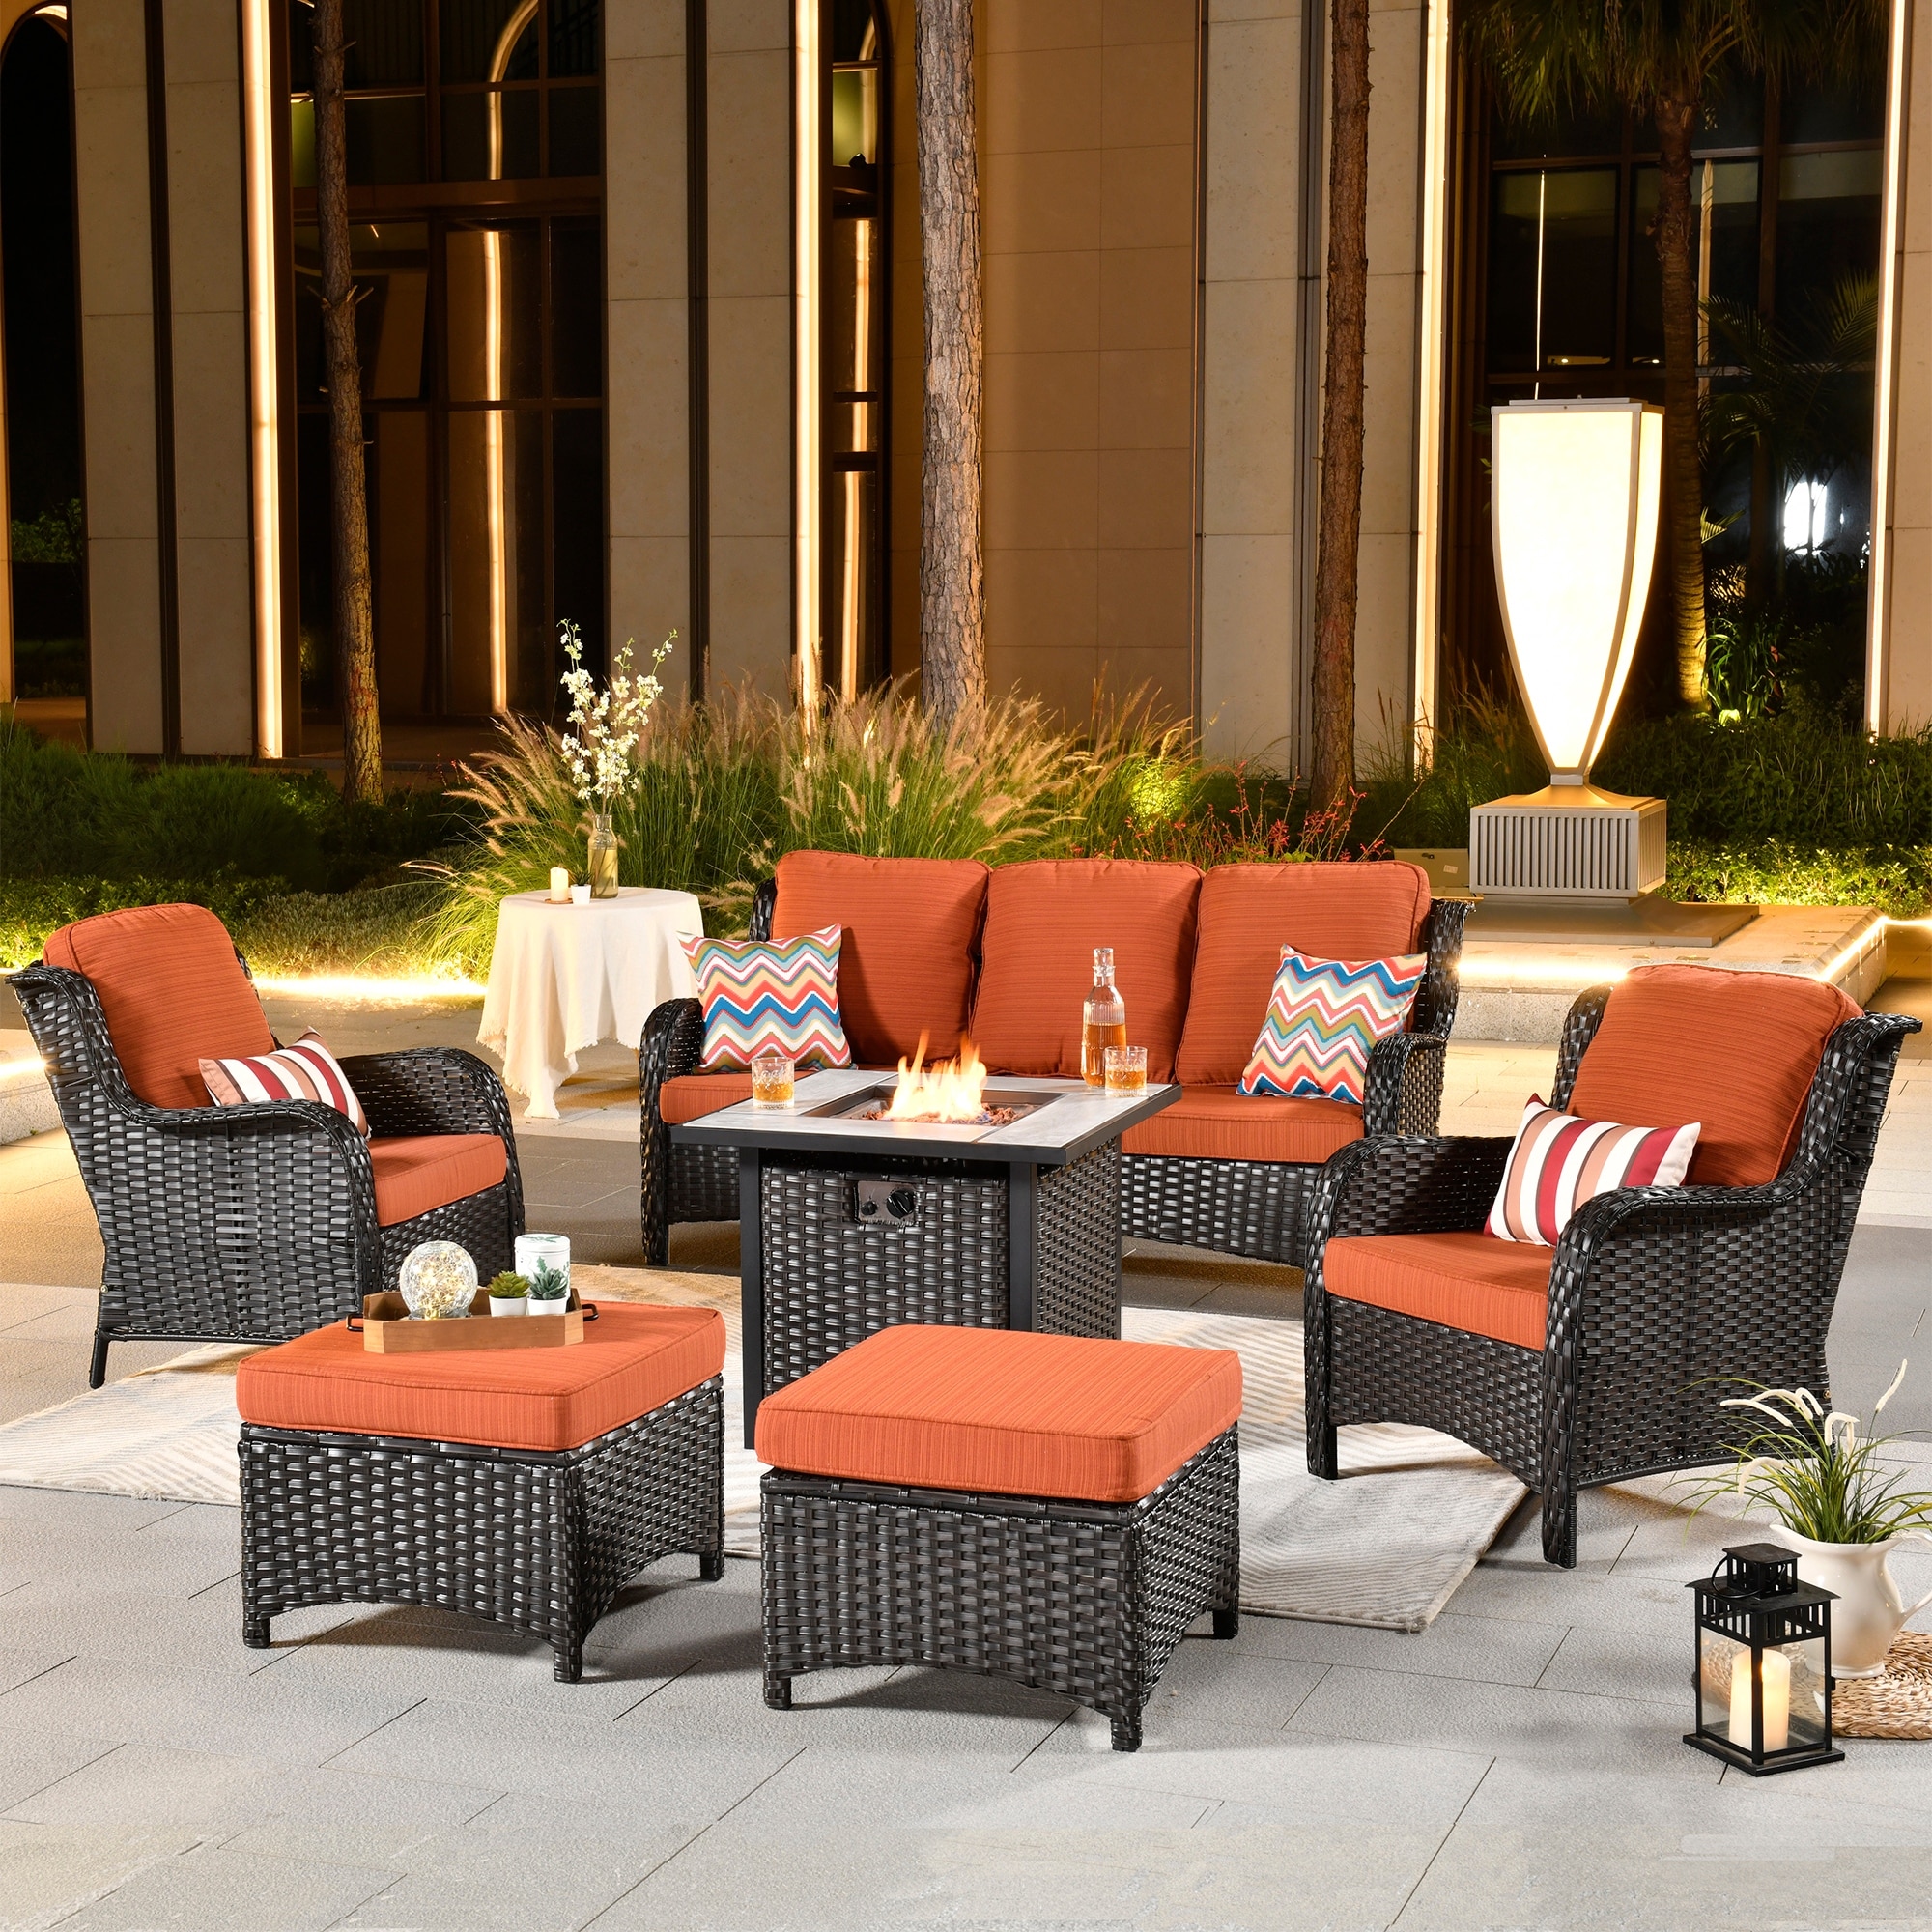 Ovios Brown Wicker 6-piece Patio Furniture Set With Fire Pit